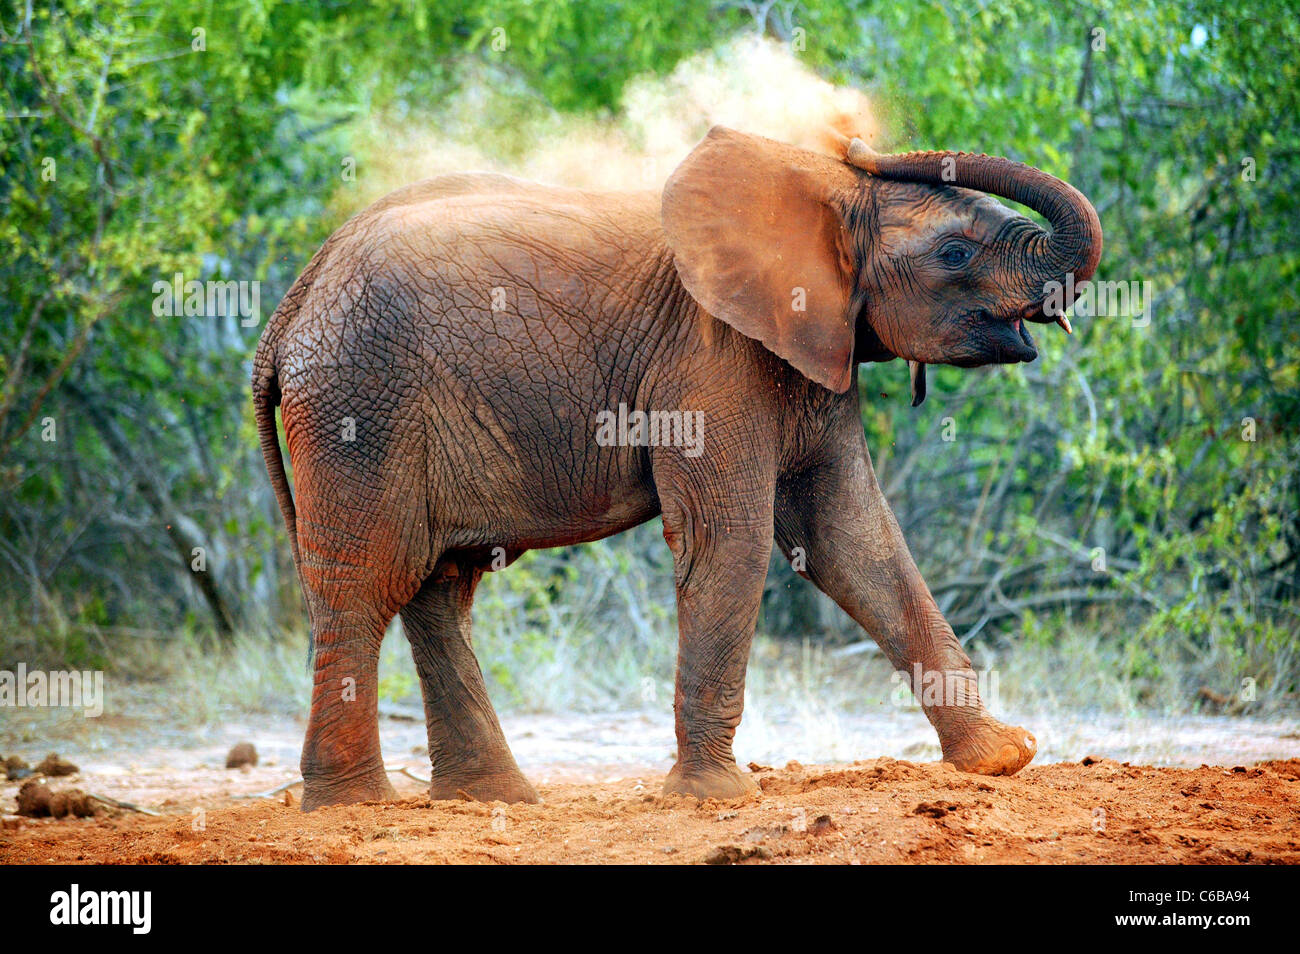 BUCHUMA HAVING A MUD BATH . ELEPHANT ORPHAN RESCUED BY THE SHELDRICK FOUNDATION AND NOW FORM PART OF A HERD IN KENYA. Stock Photo